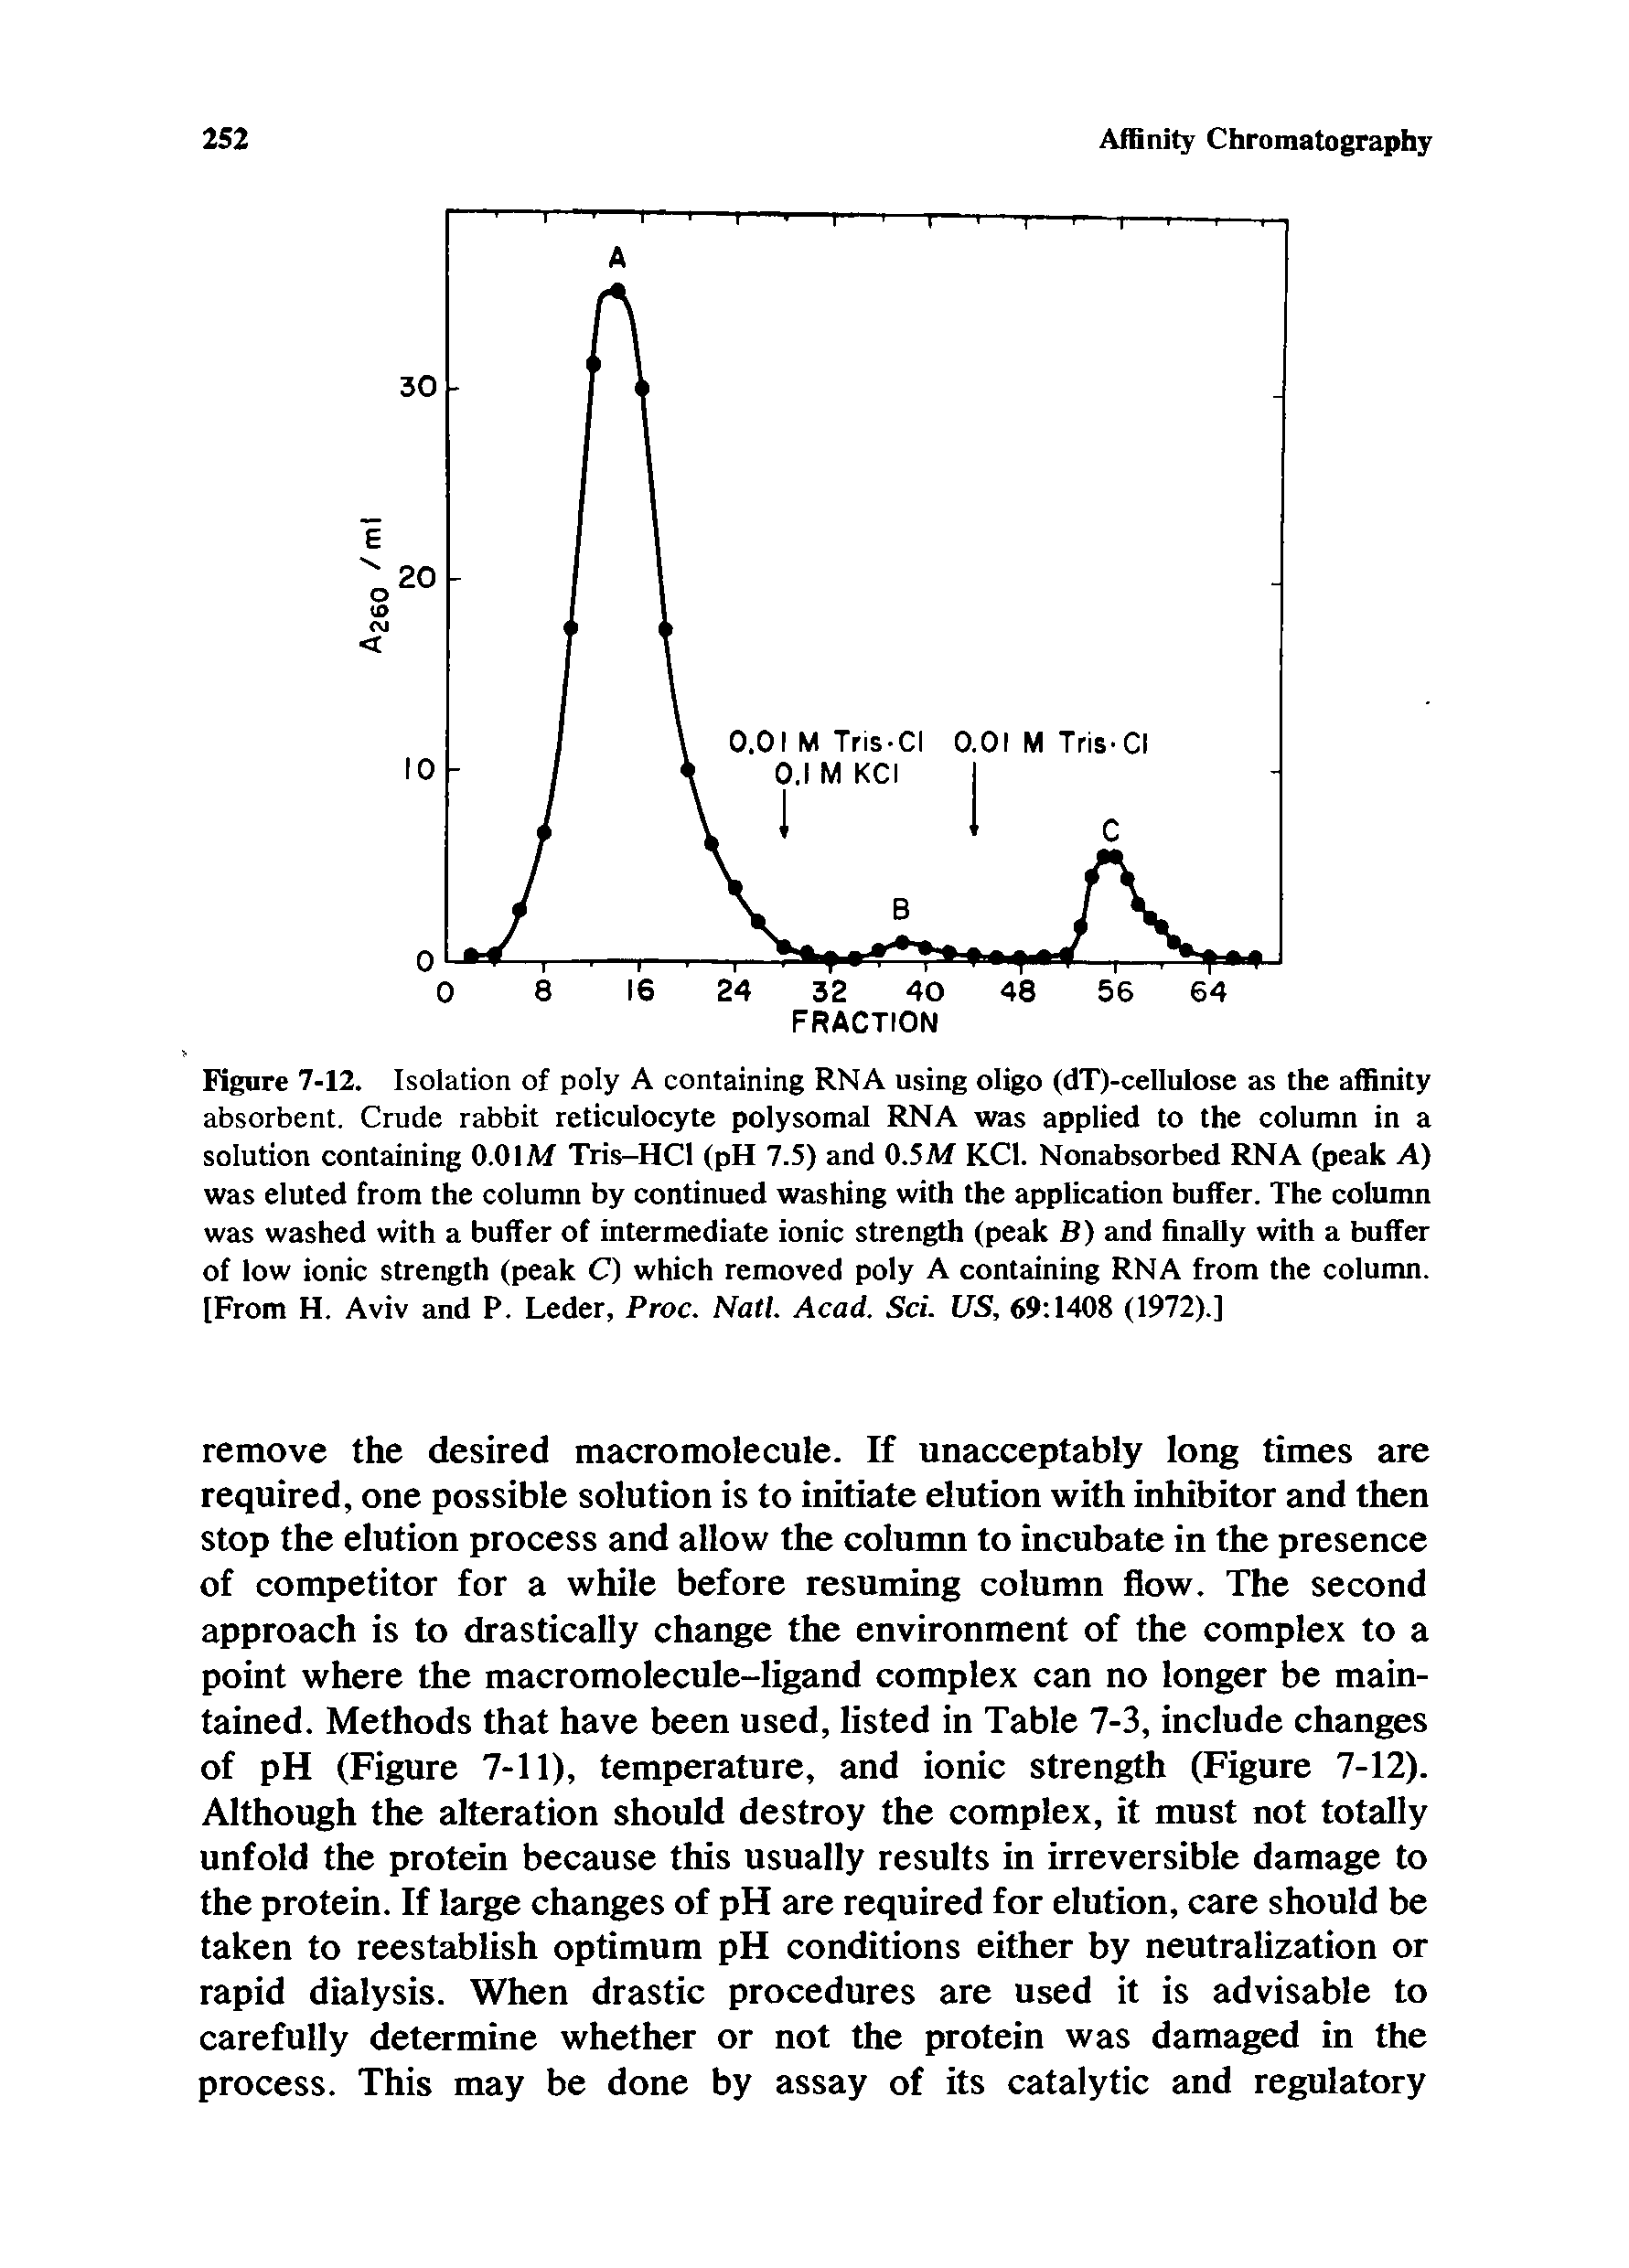 Figure 7-12. Isolation of poly A containing RNA using oligo (dT)-cellulose as the affinity absorbent. Crude rabbit reticulocyte polysomal RNA was applied to the column in a solution containing 0.01M Tris-HCl (pH 7.5) and 0.5M KCl. Nonabsorbed RNA (peak A) was eluted from the column by continued washing with the application buffer. The column was washed with a buffer of intermediate ionic strength (peak B) and finally with a buffer of low ionic strength (peak C) which removed poly A containing RNA from the column. [From H. Aviv and P. Leder, Proc. Natl. Acad. Sci. US, 69 1408 (1972).]...